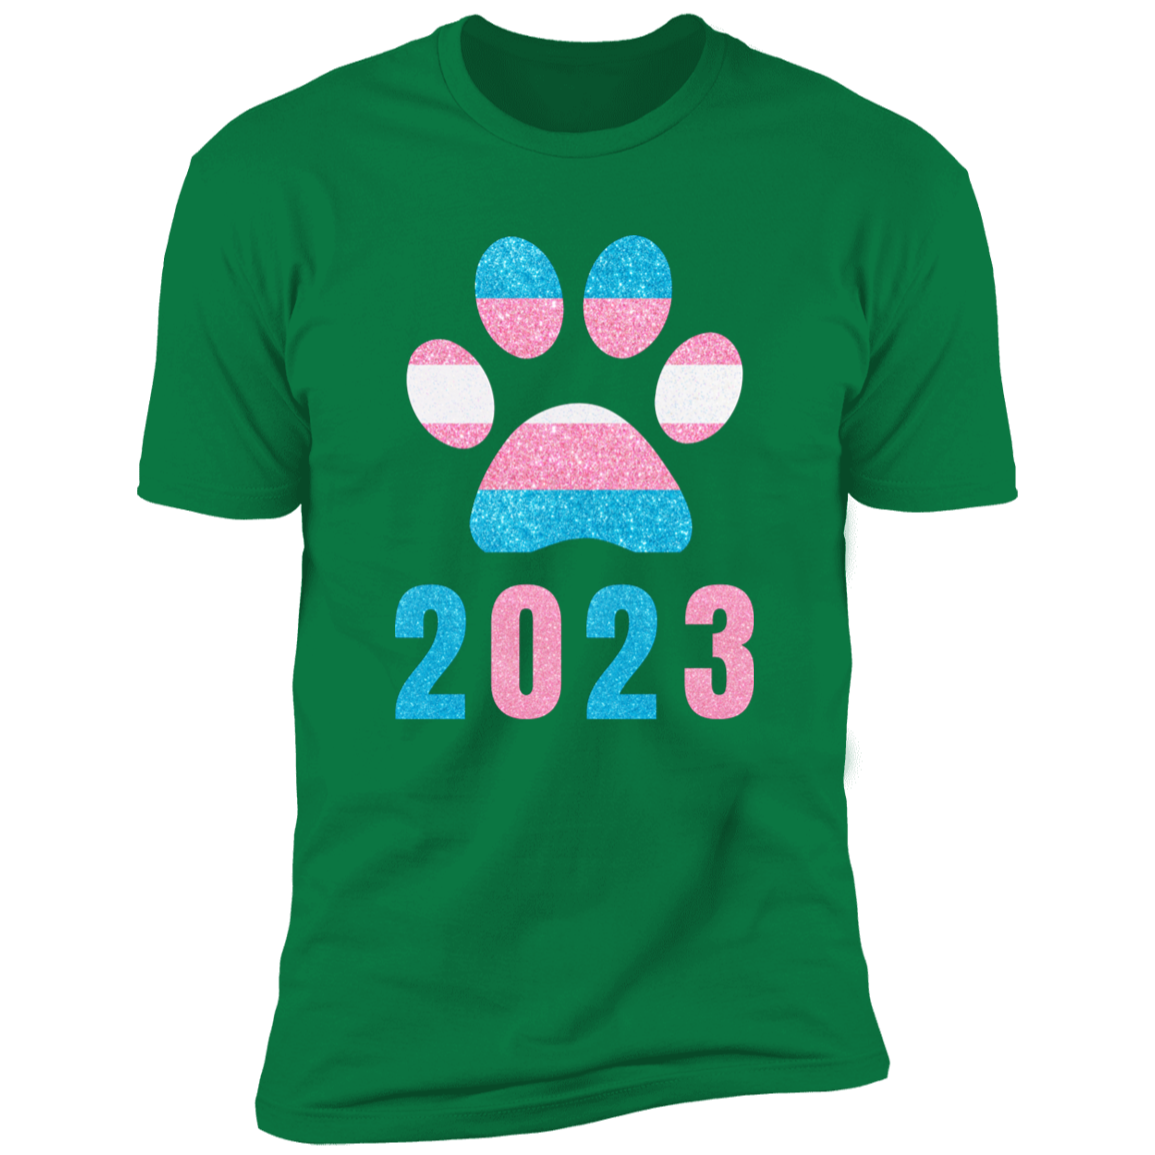 Dog Paw Trans Pride 2023 t-shirt, dog trans pride dog shirt for humans, in kelly green